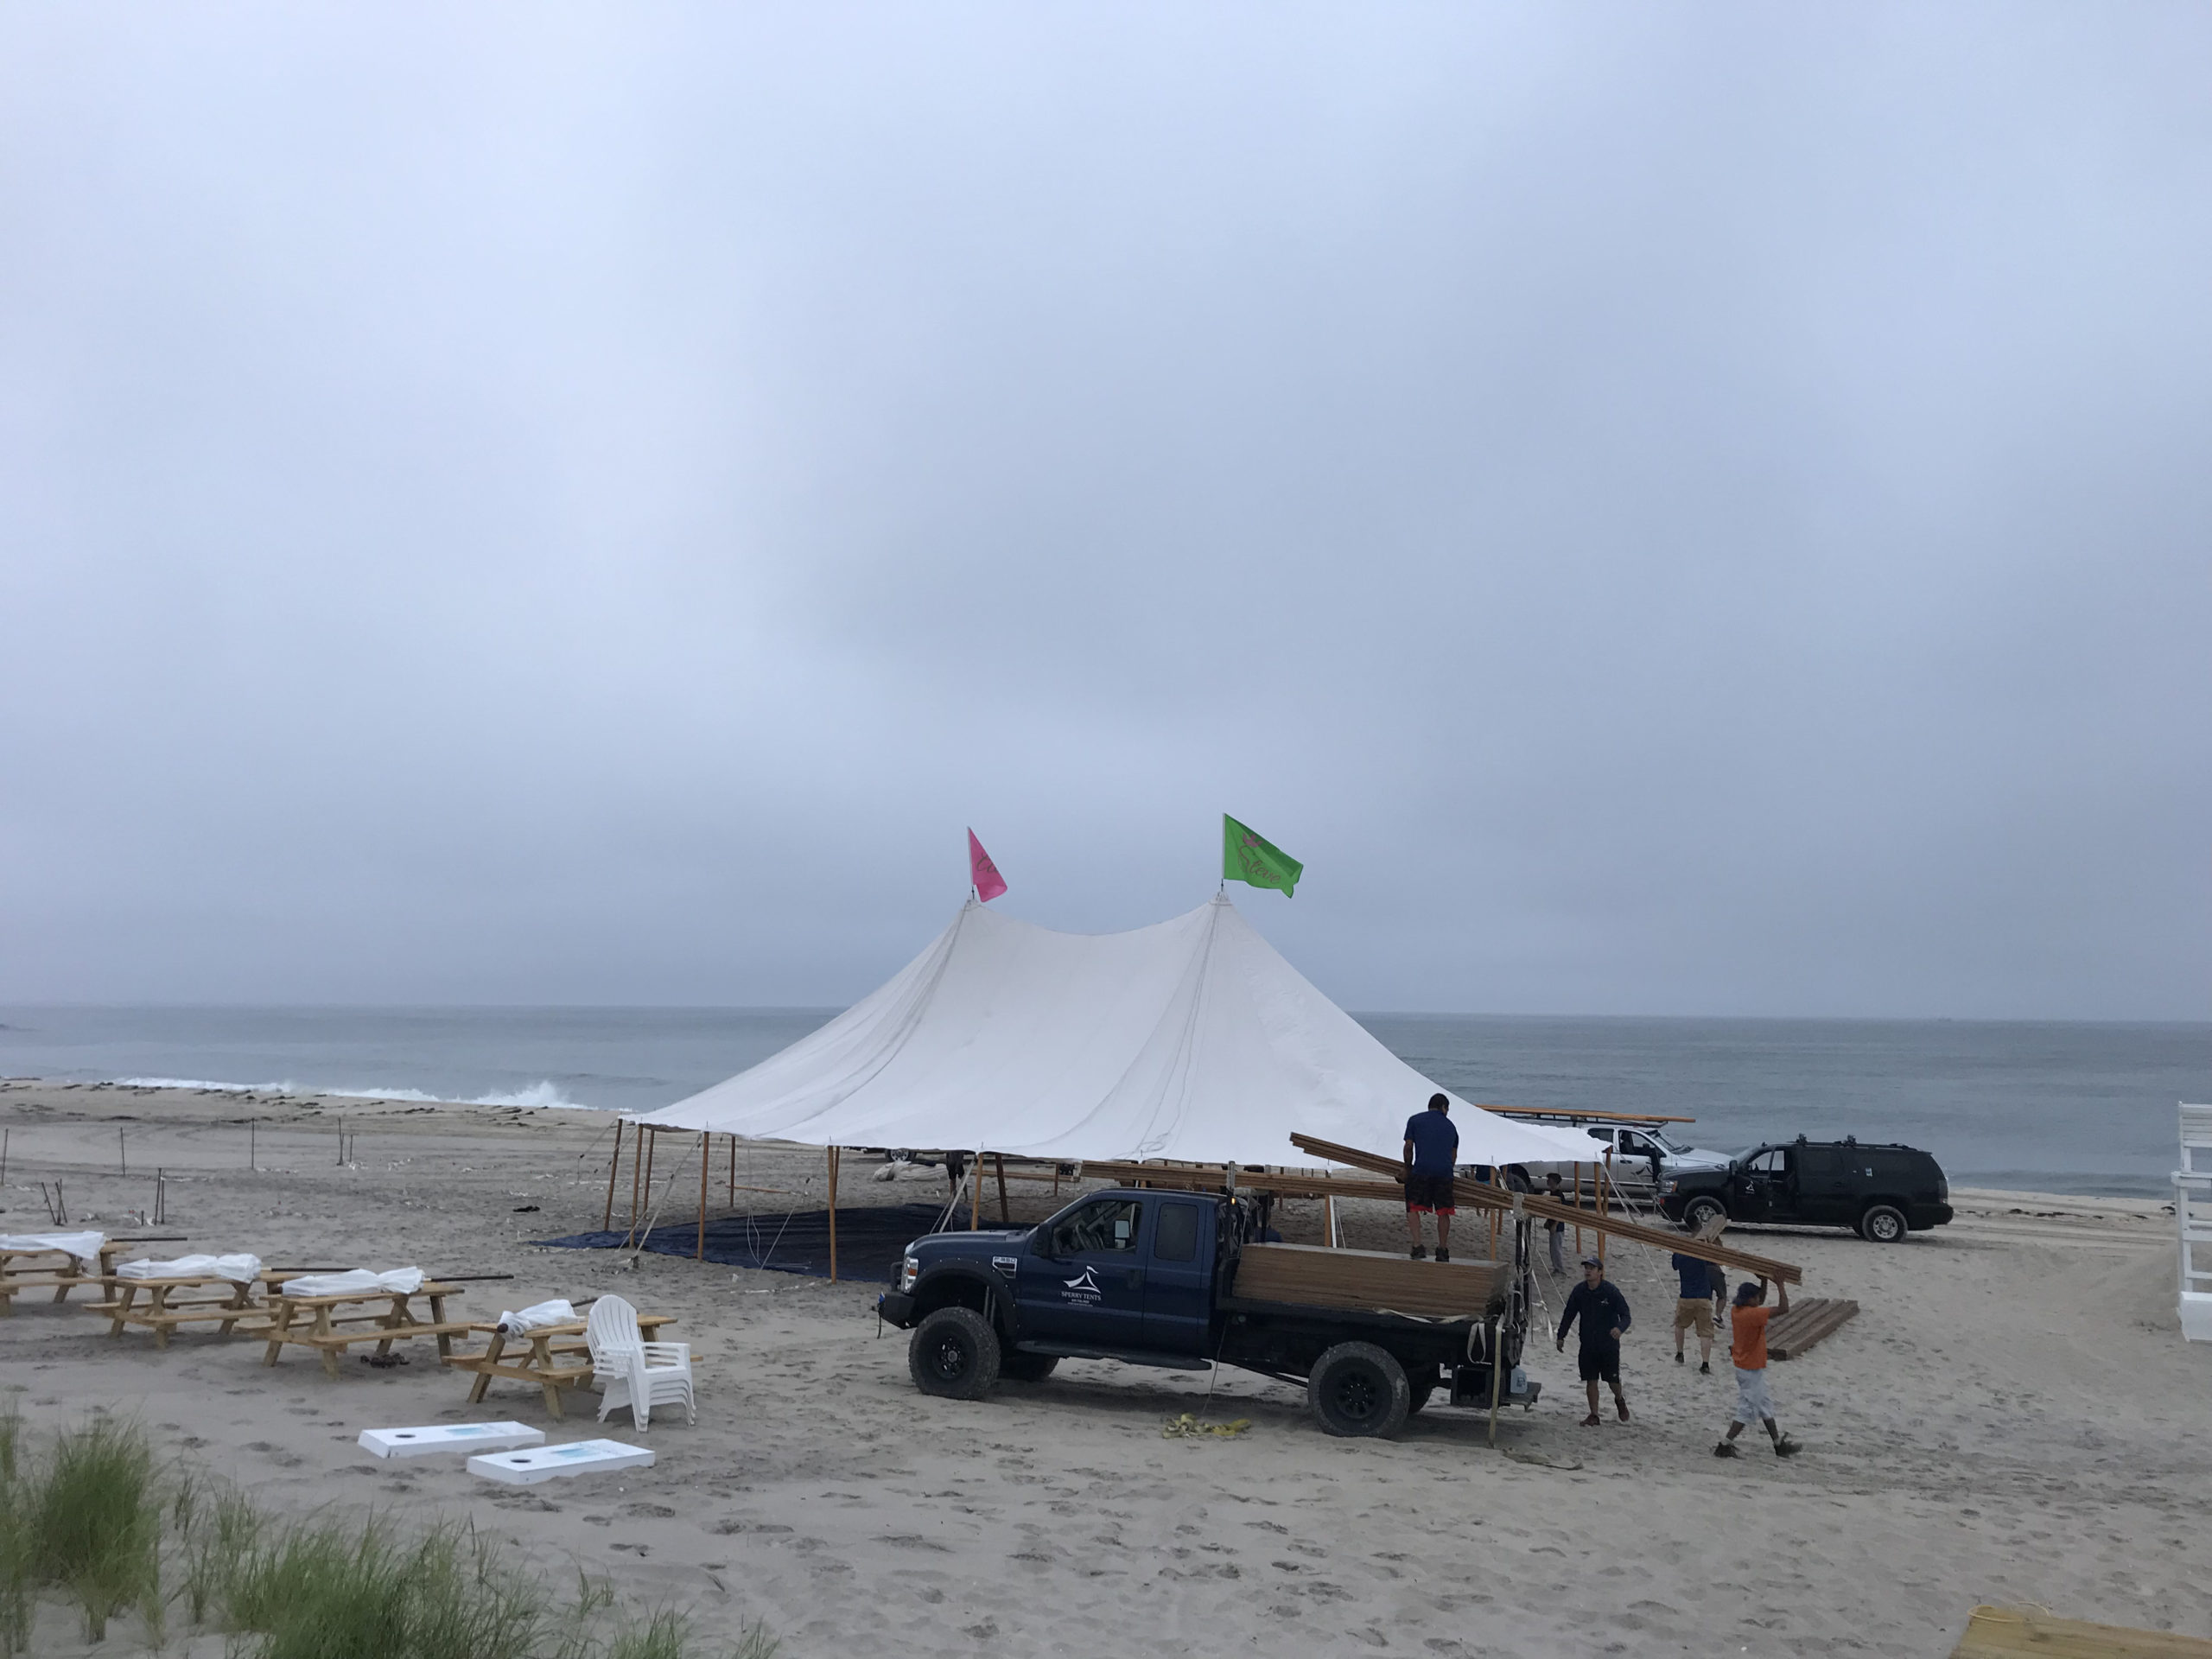 A single catered event at a Hamptons home can involve a dozen companies and hundreds of employees and generate thousands, or millions, of dollars in revenue for the local economy.